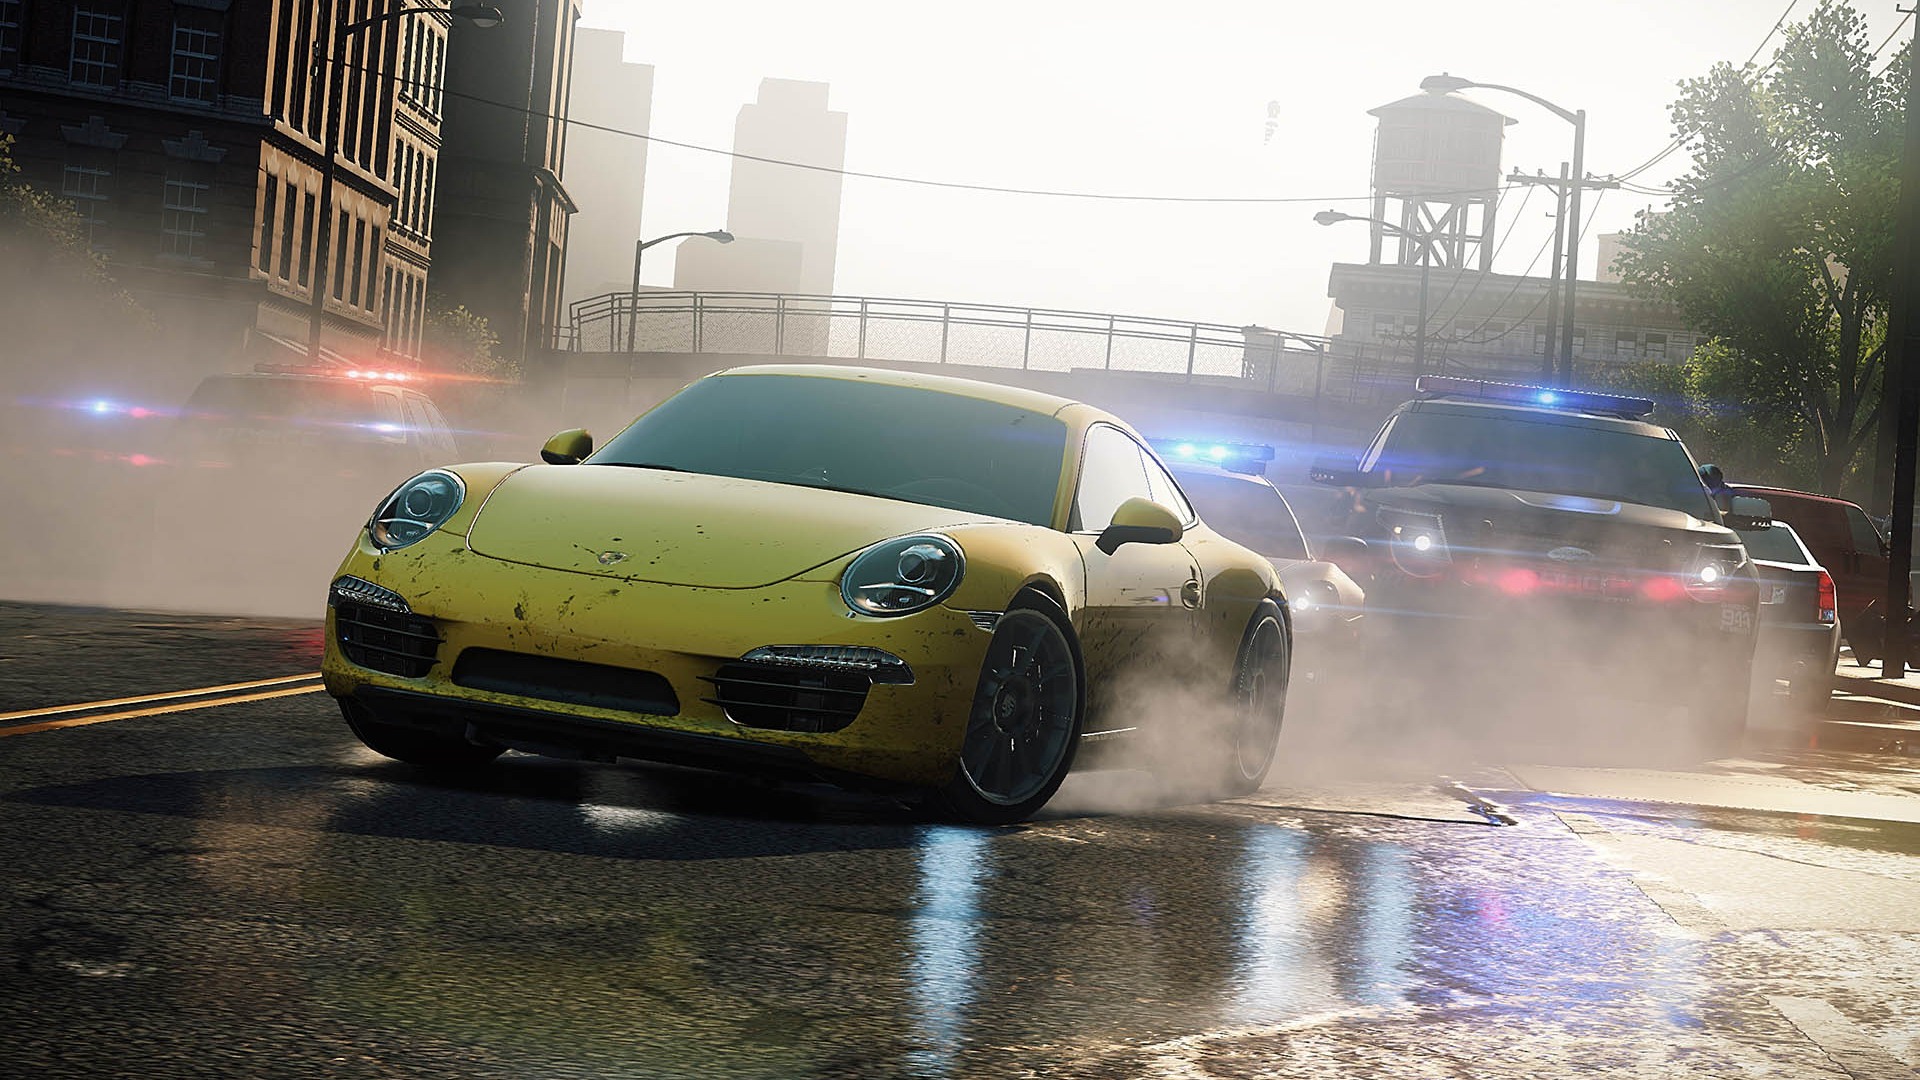 Need for Speed: Most Wanted 极品飞车17：最高通缉 高清壁纸18 - 1920x1080